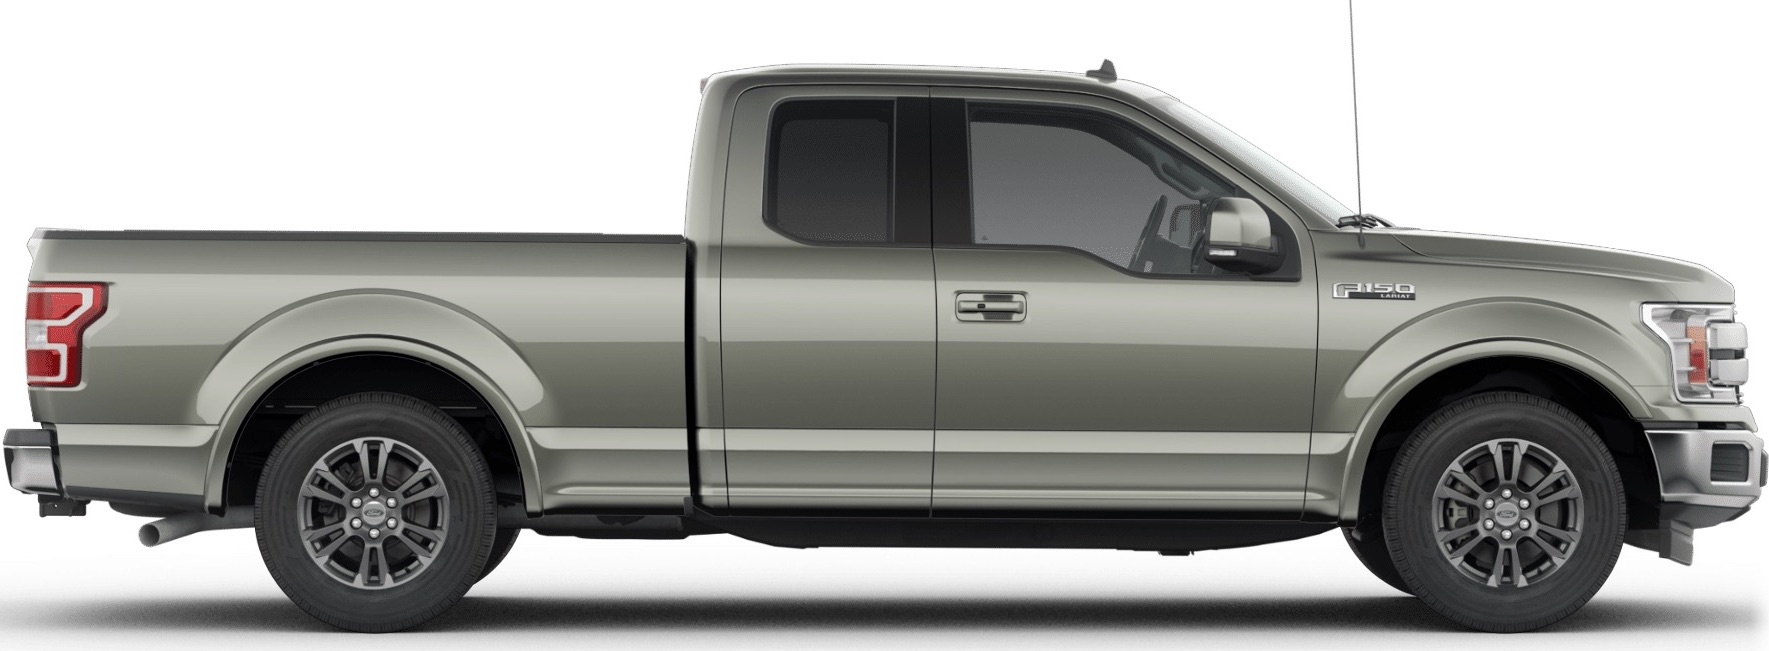 New Silver Spruce Color Of The 2019 Ford F 150 First Look